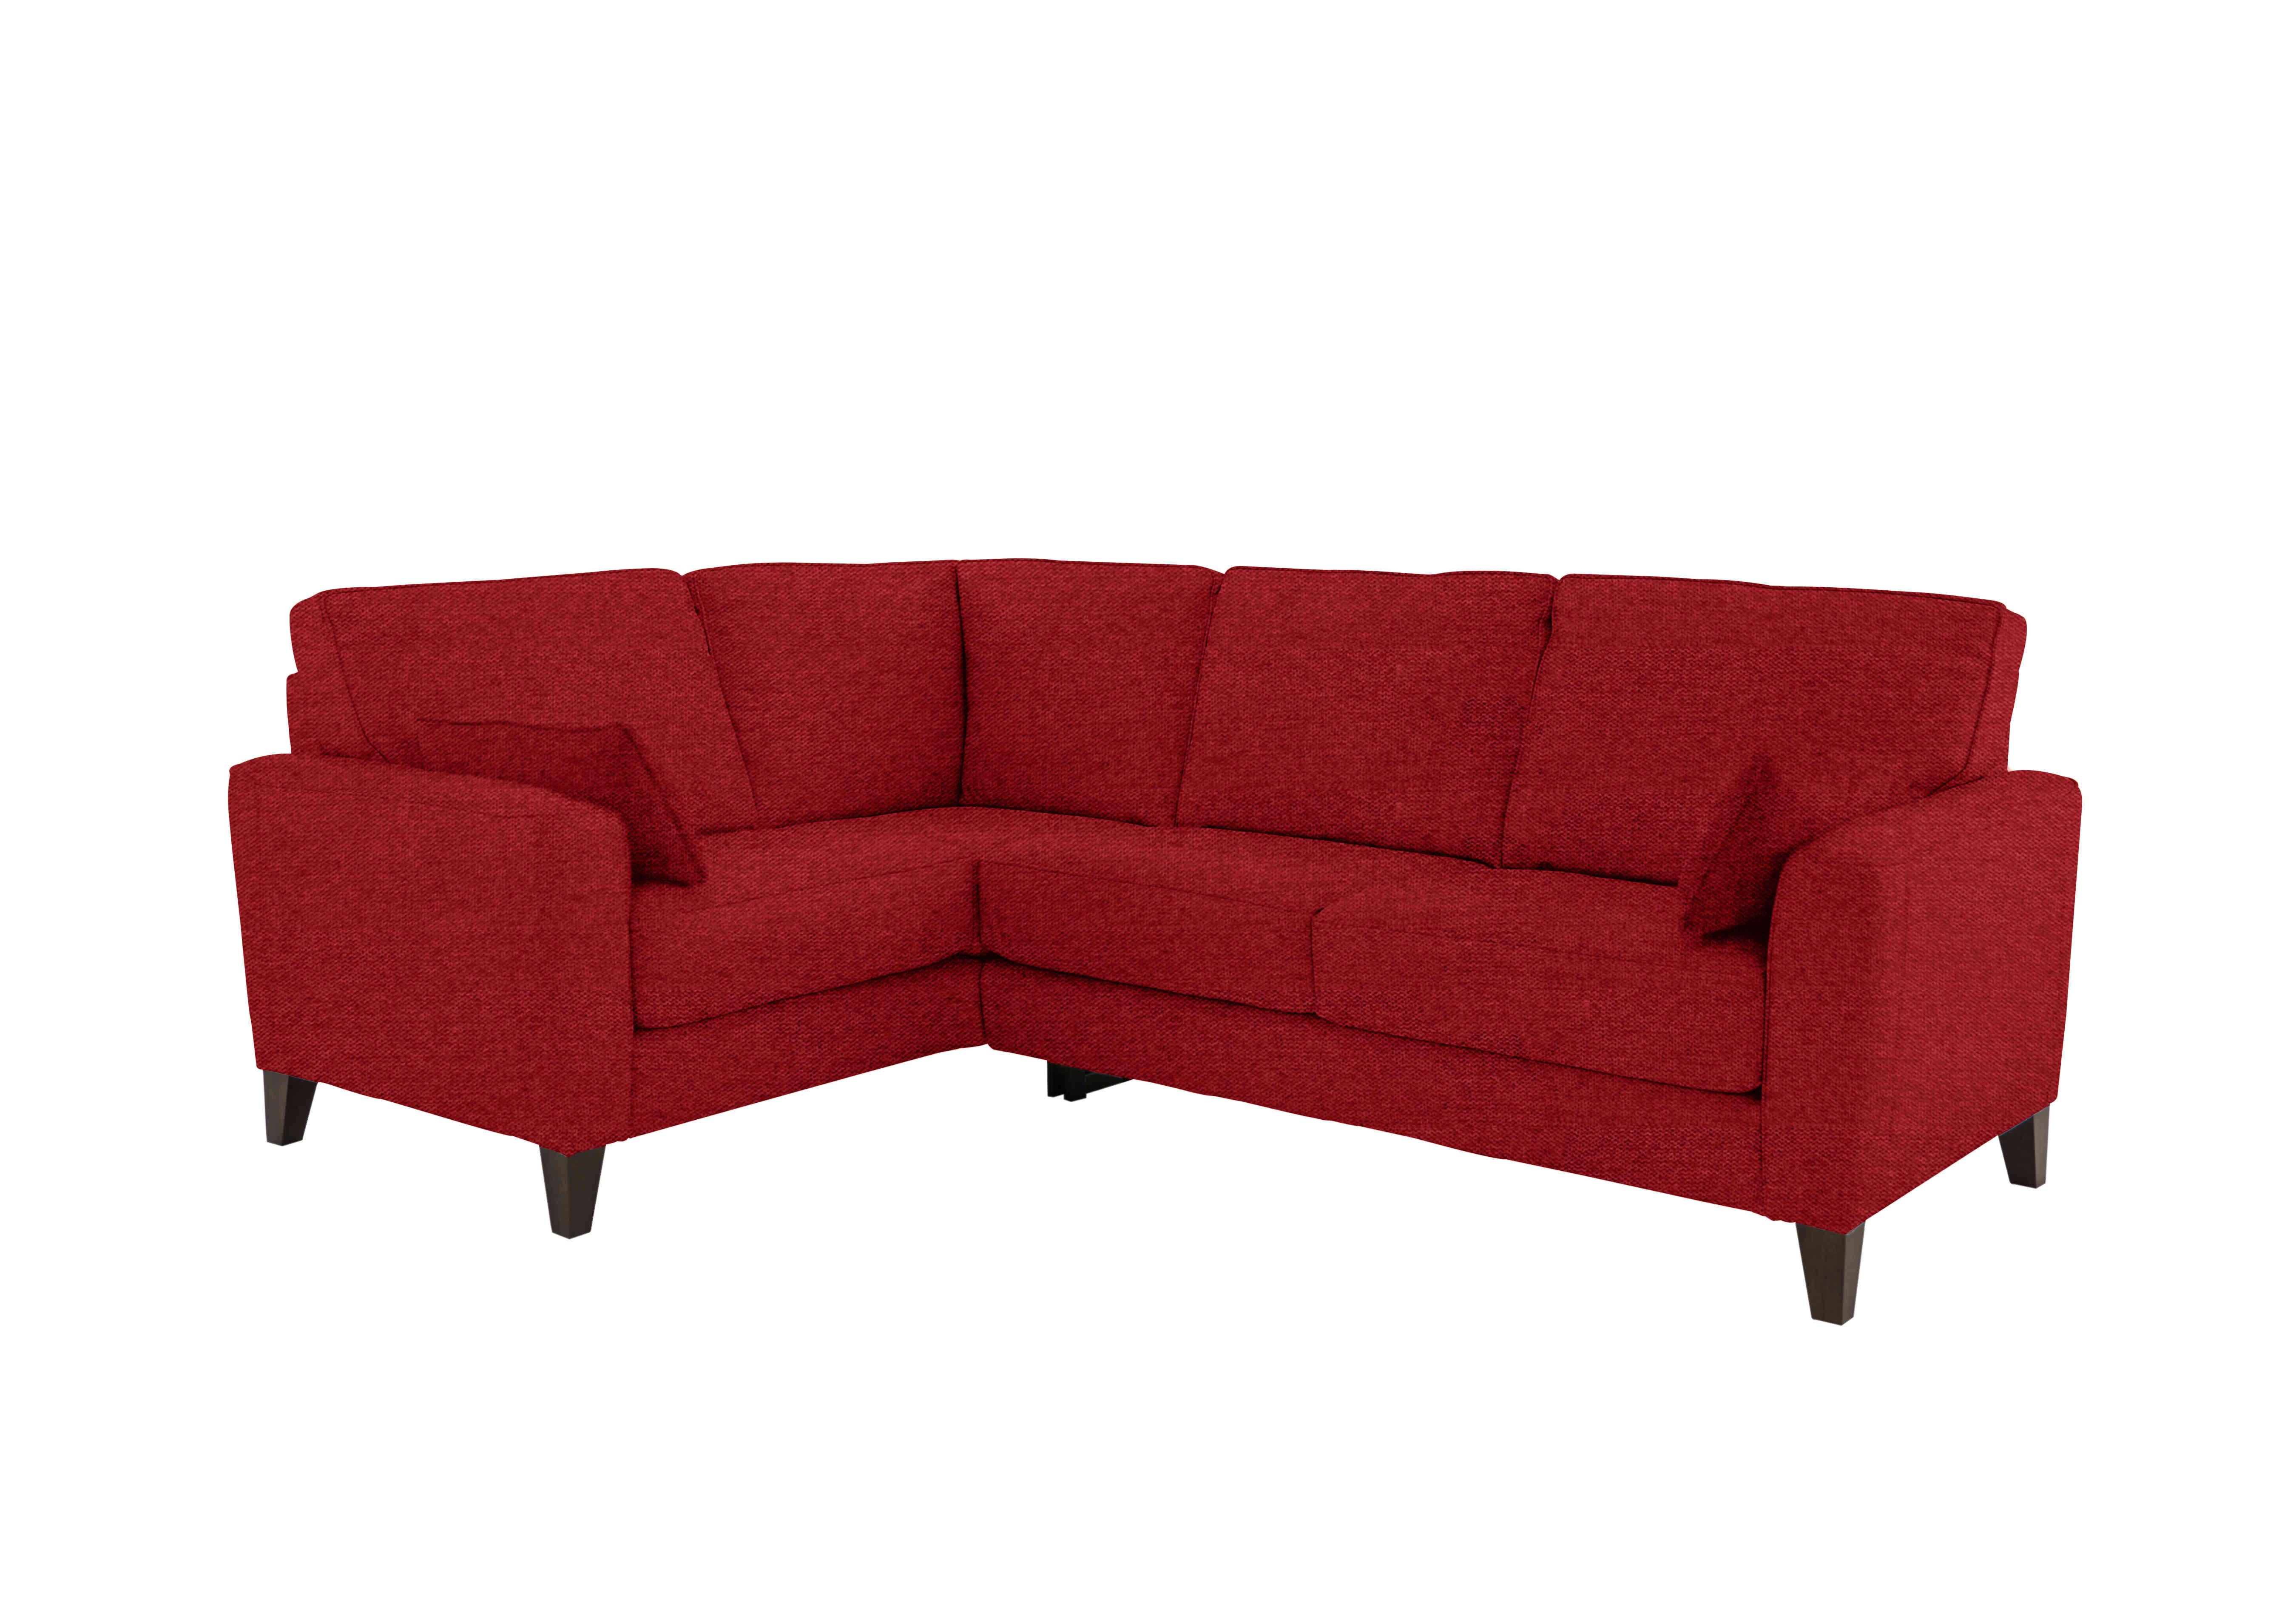 Brondby Small Fabric Corner Sofa in Fab-Blt-R29 Red on Furniture Village